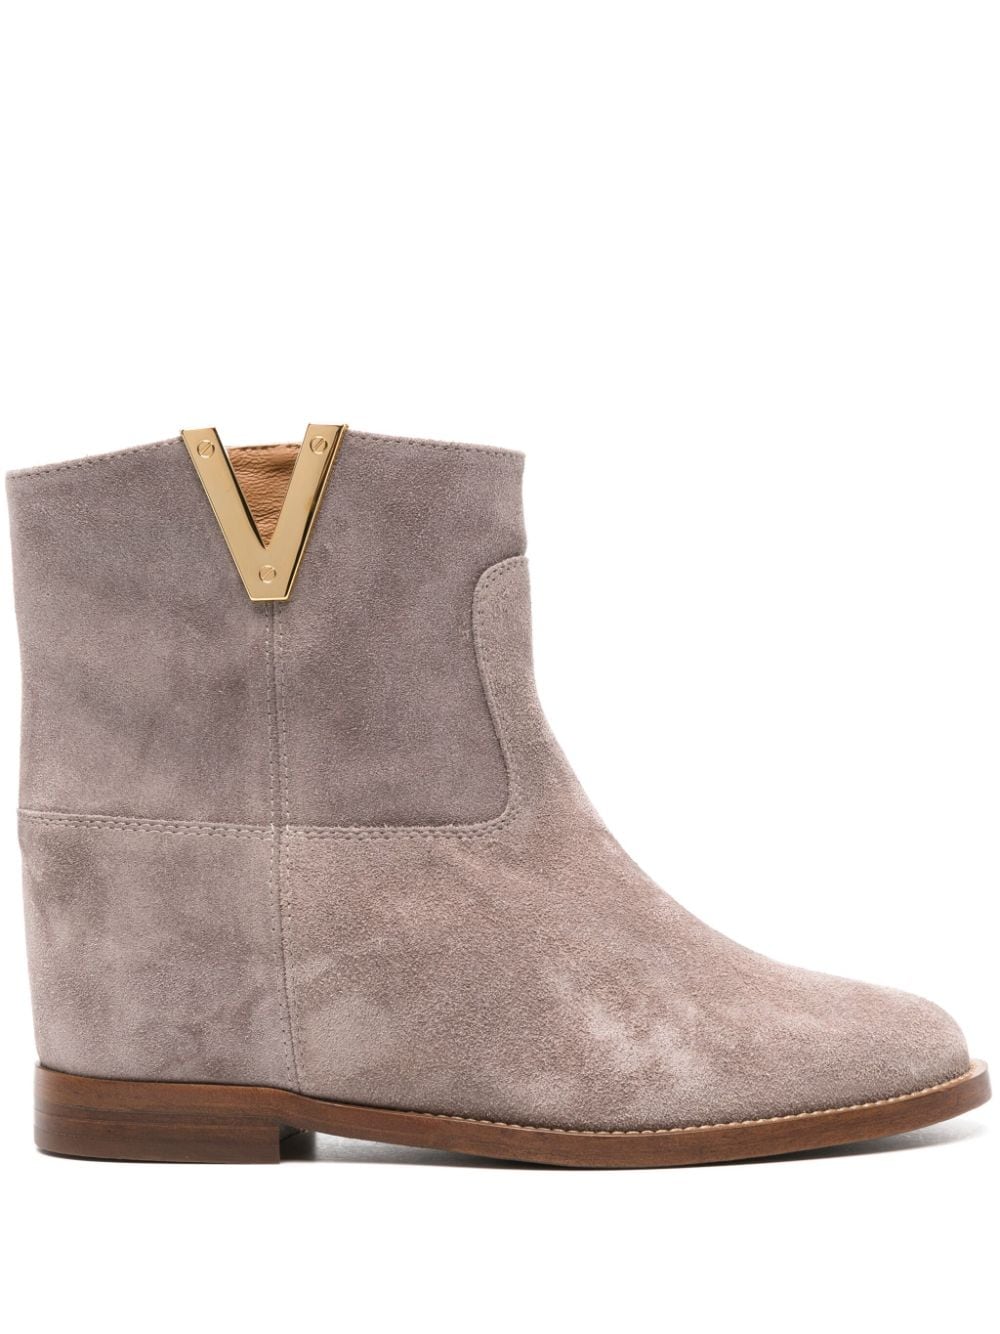 Via Roma 15 Stivale Suede Ankle Boots In Neutrals